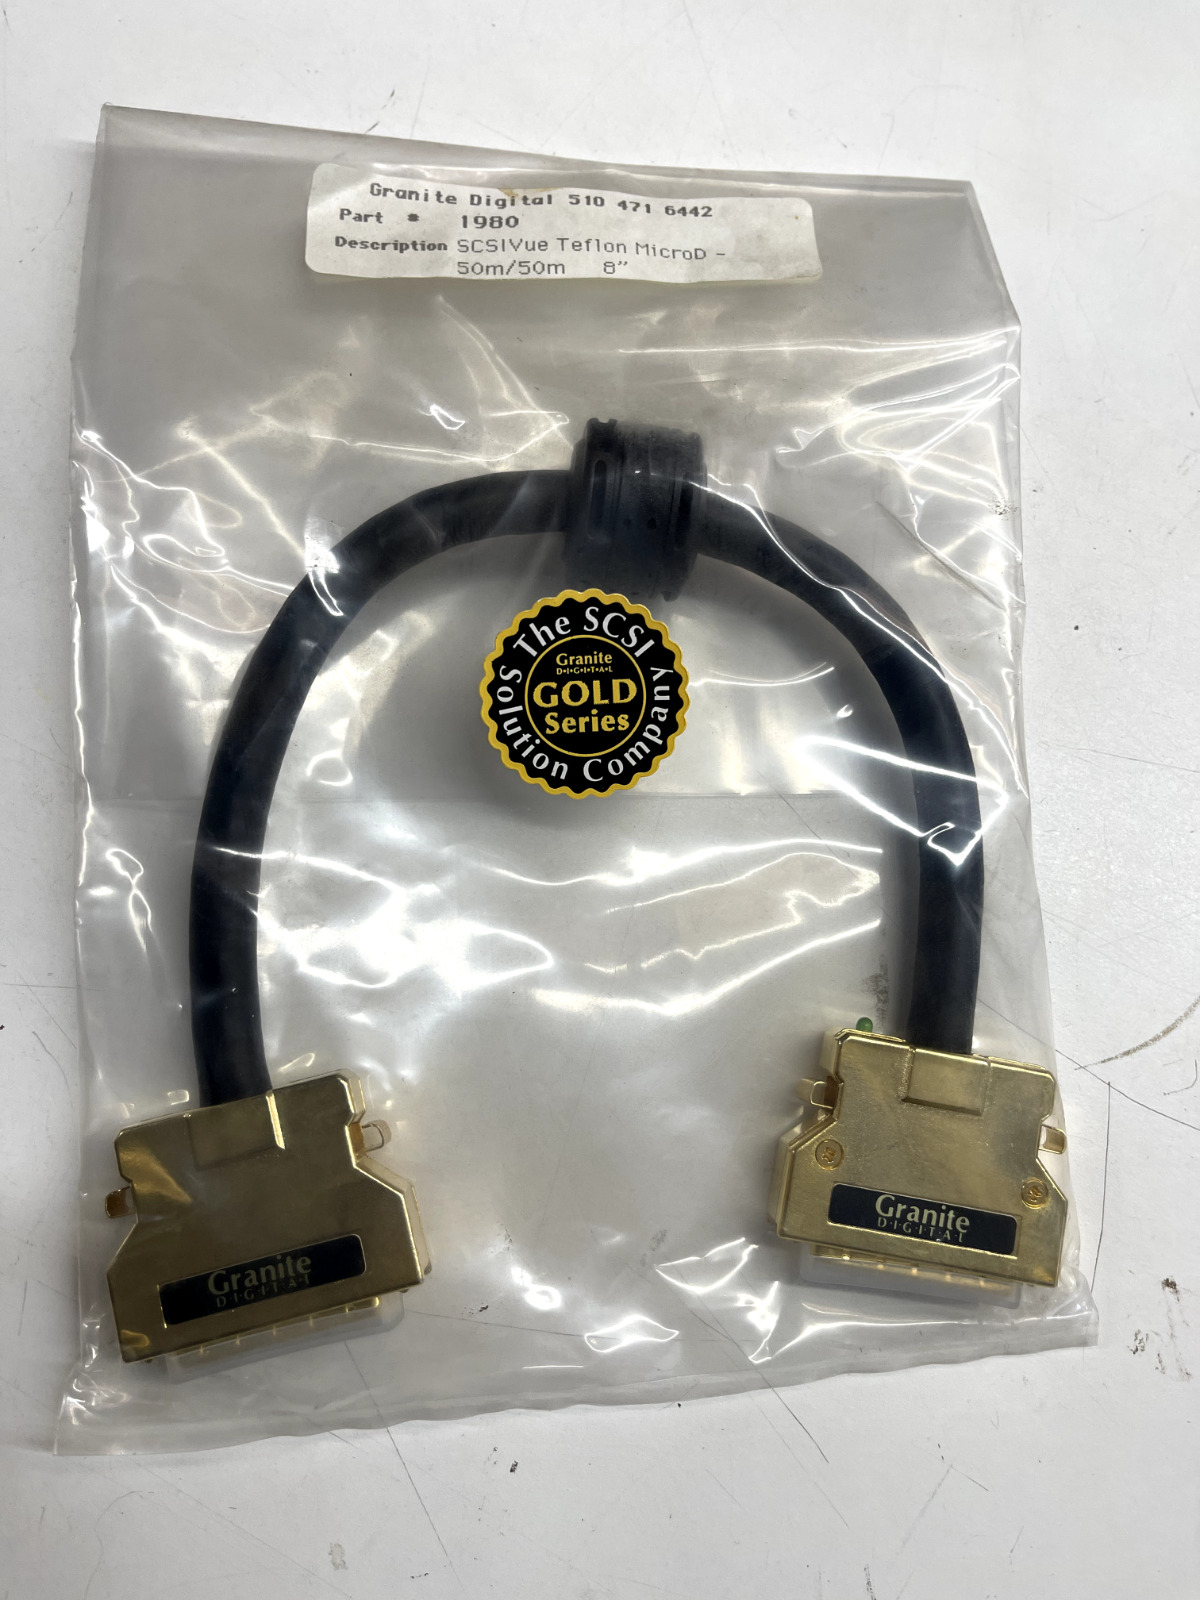 SCSI Gold-Diagnostic Cables - 50 MicroD(m) to 50 MicroD(m) 8 inch.